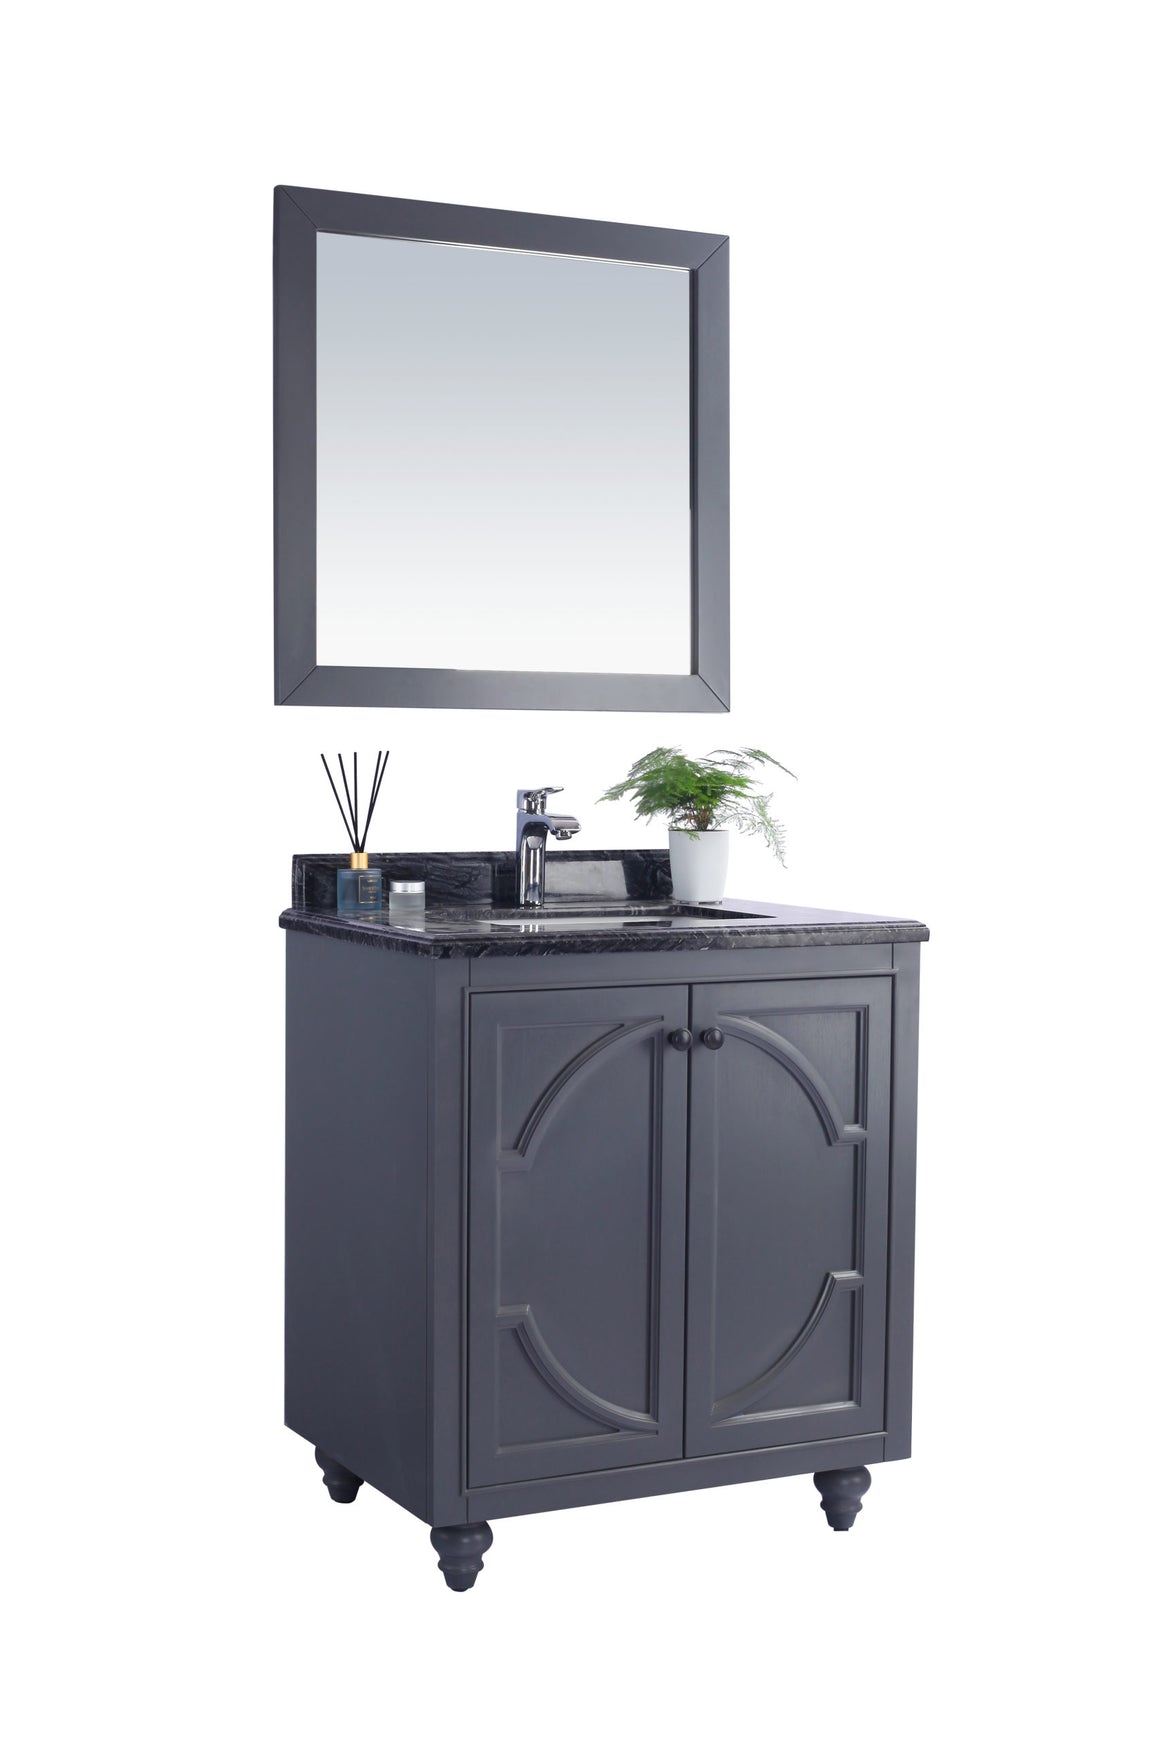 Odyssey - 30 - Maple Grey Cabinet + Black Wood Marble Countertop